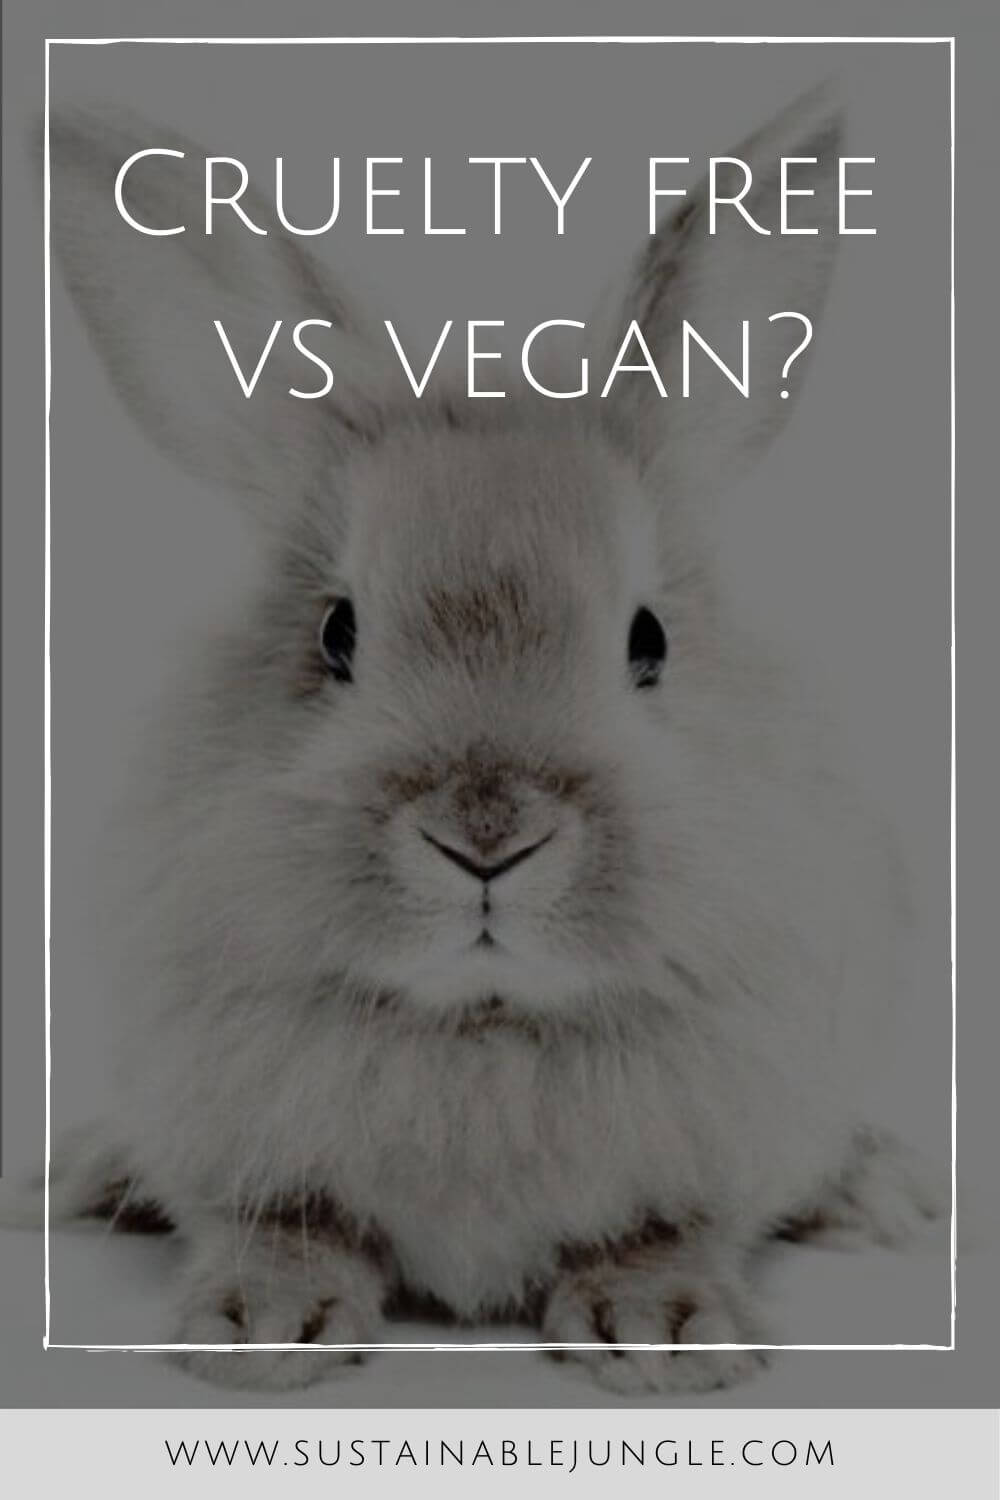 Cruelty free vs Vegan: The future of the beauty industry is vegan AND cruelty-free. But why do we need to refer to both terms, are they not synonymous? The answer: it depends. #crueltyfreevsvegan #sustainablejungle